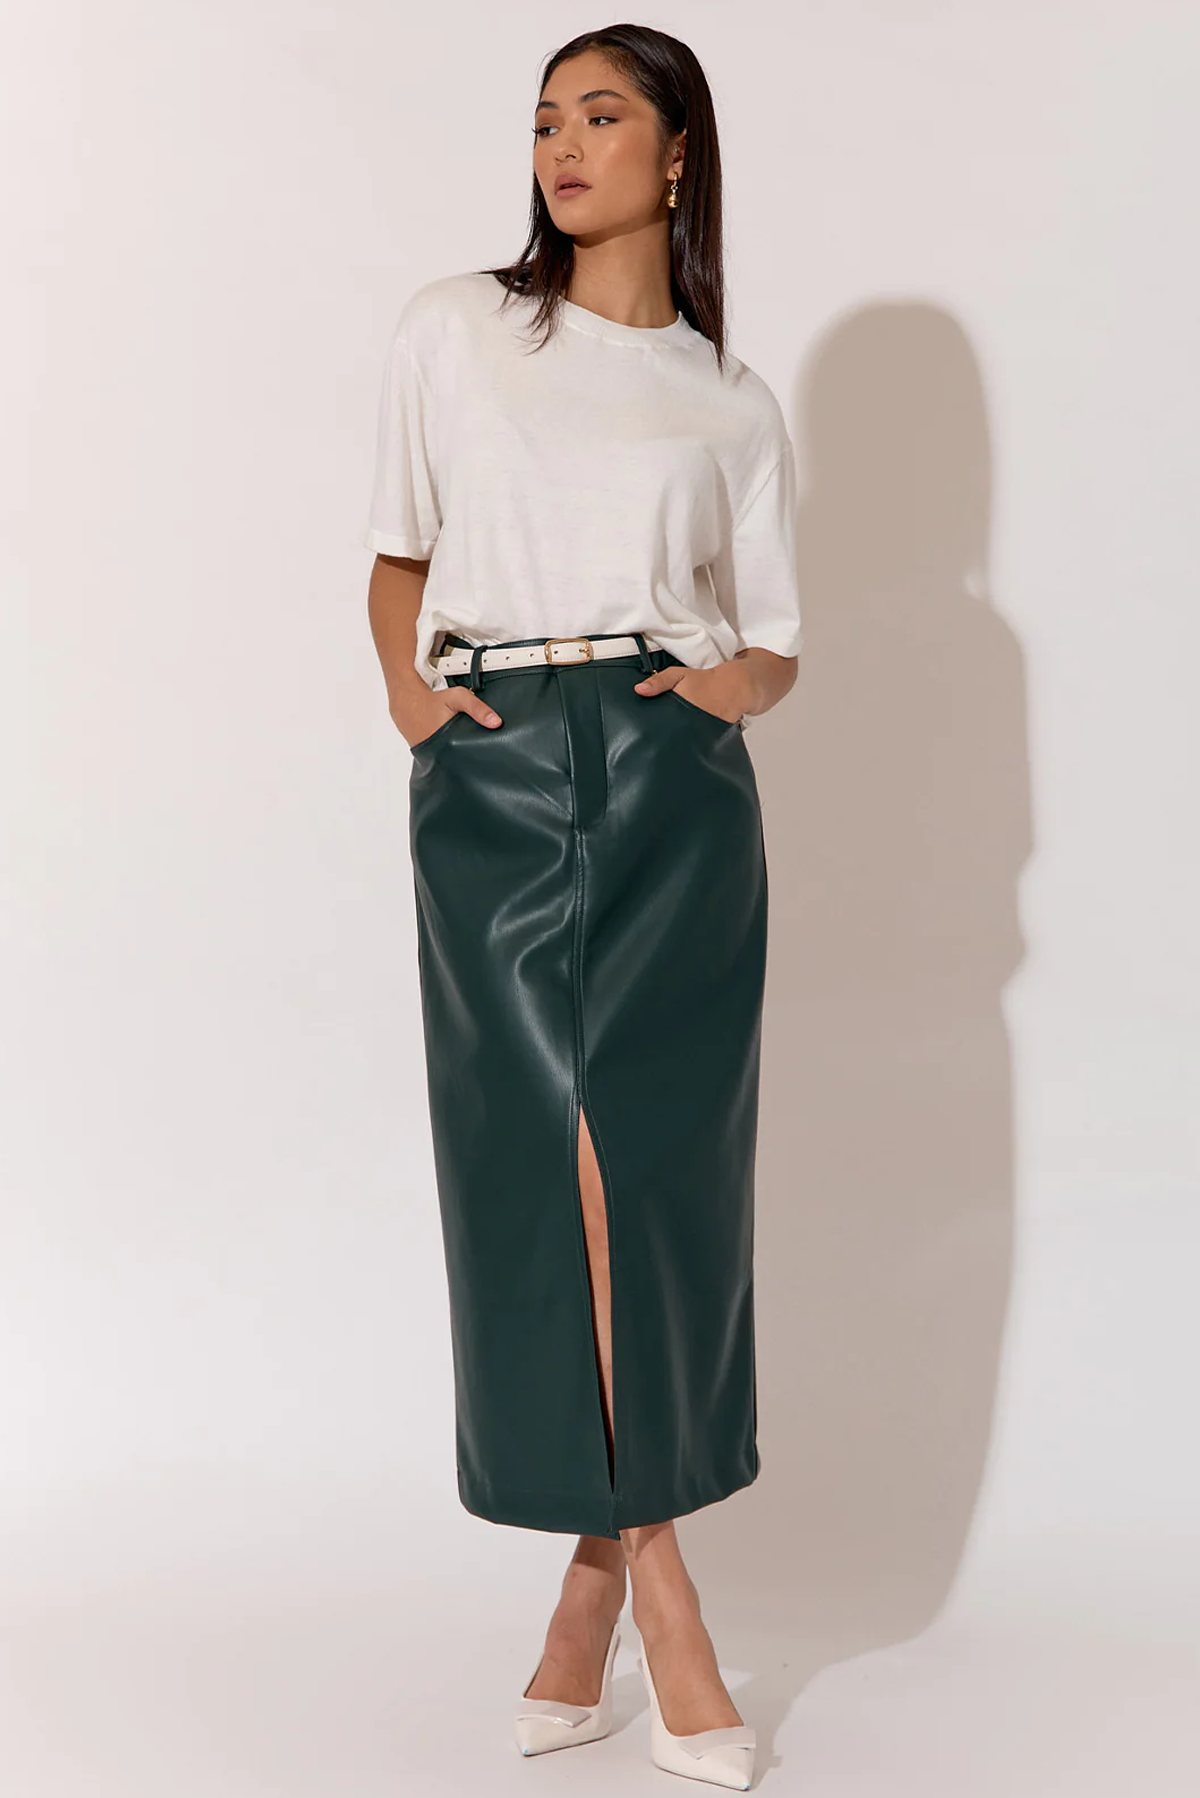 ASHER FAUX LEATHER SKIRT